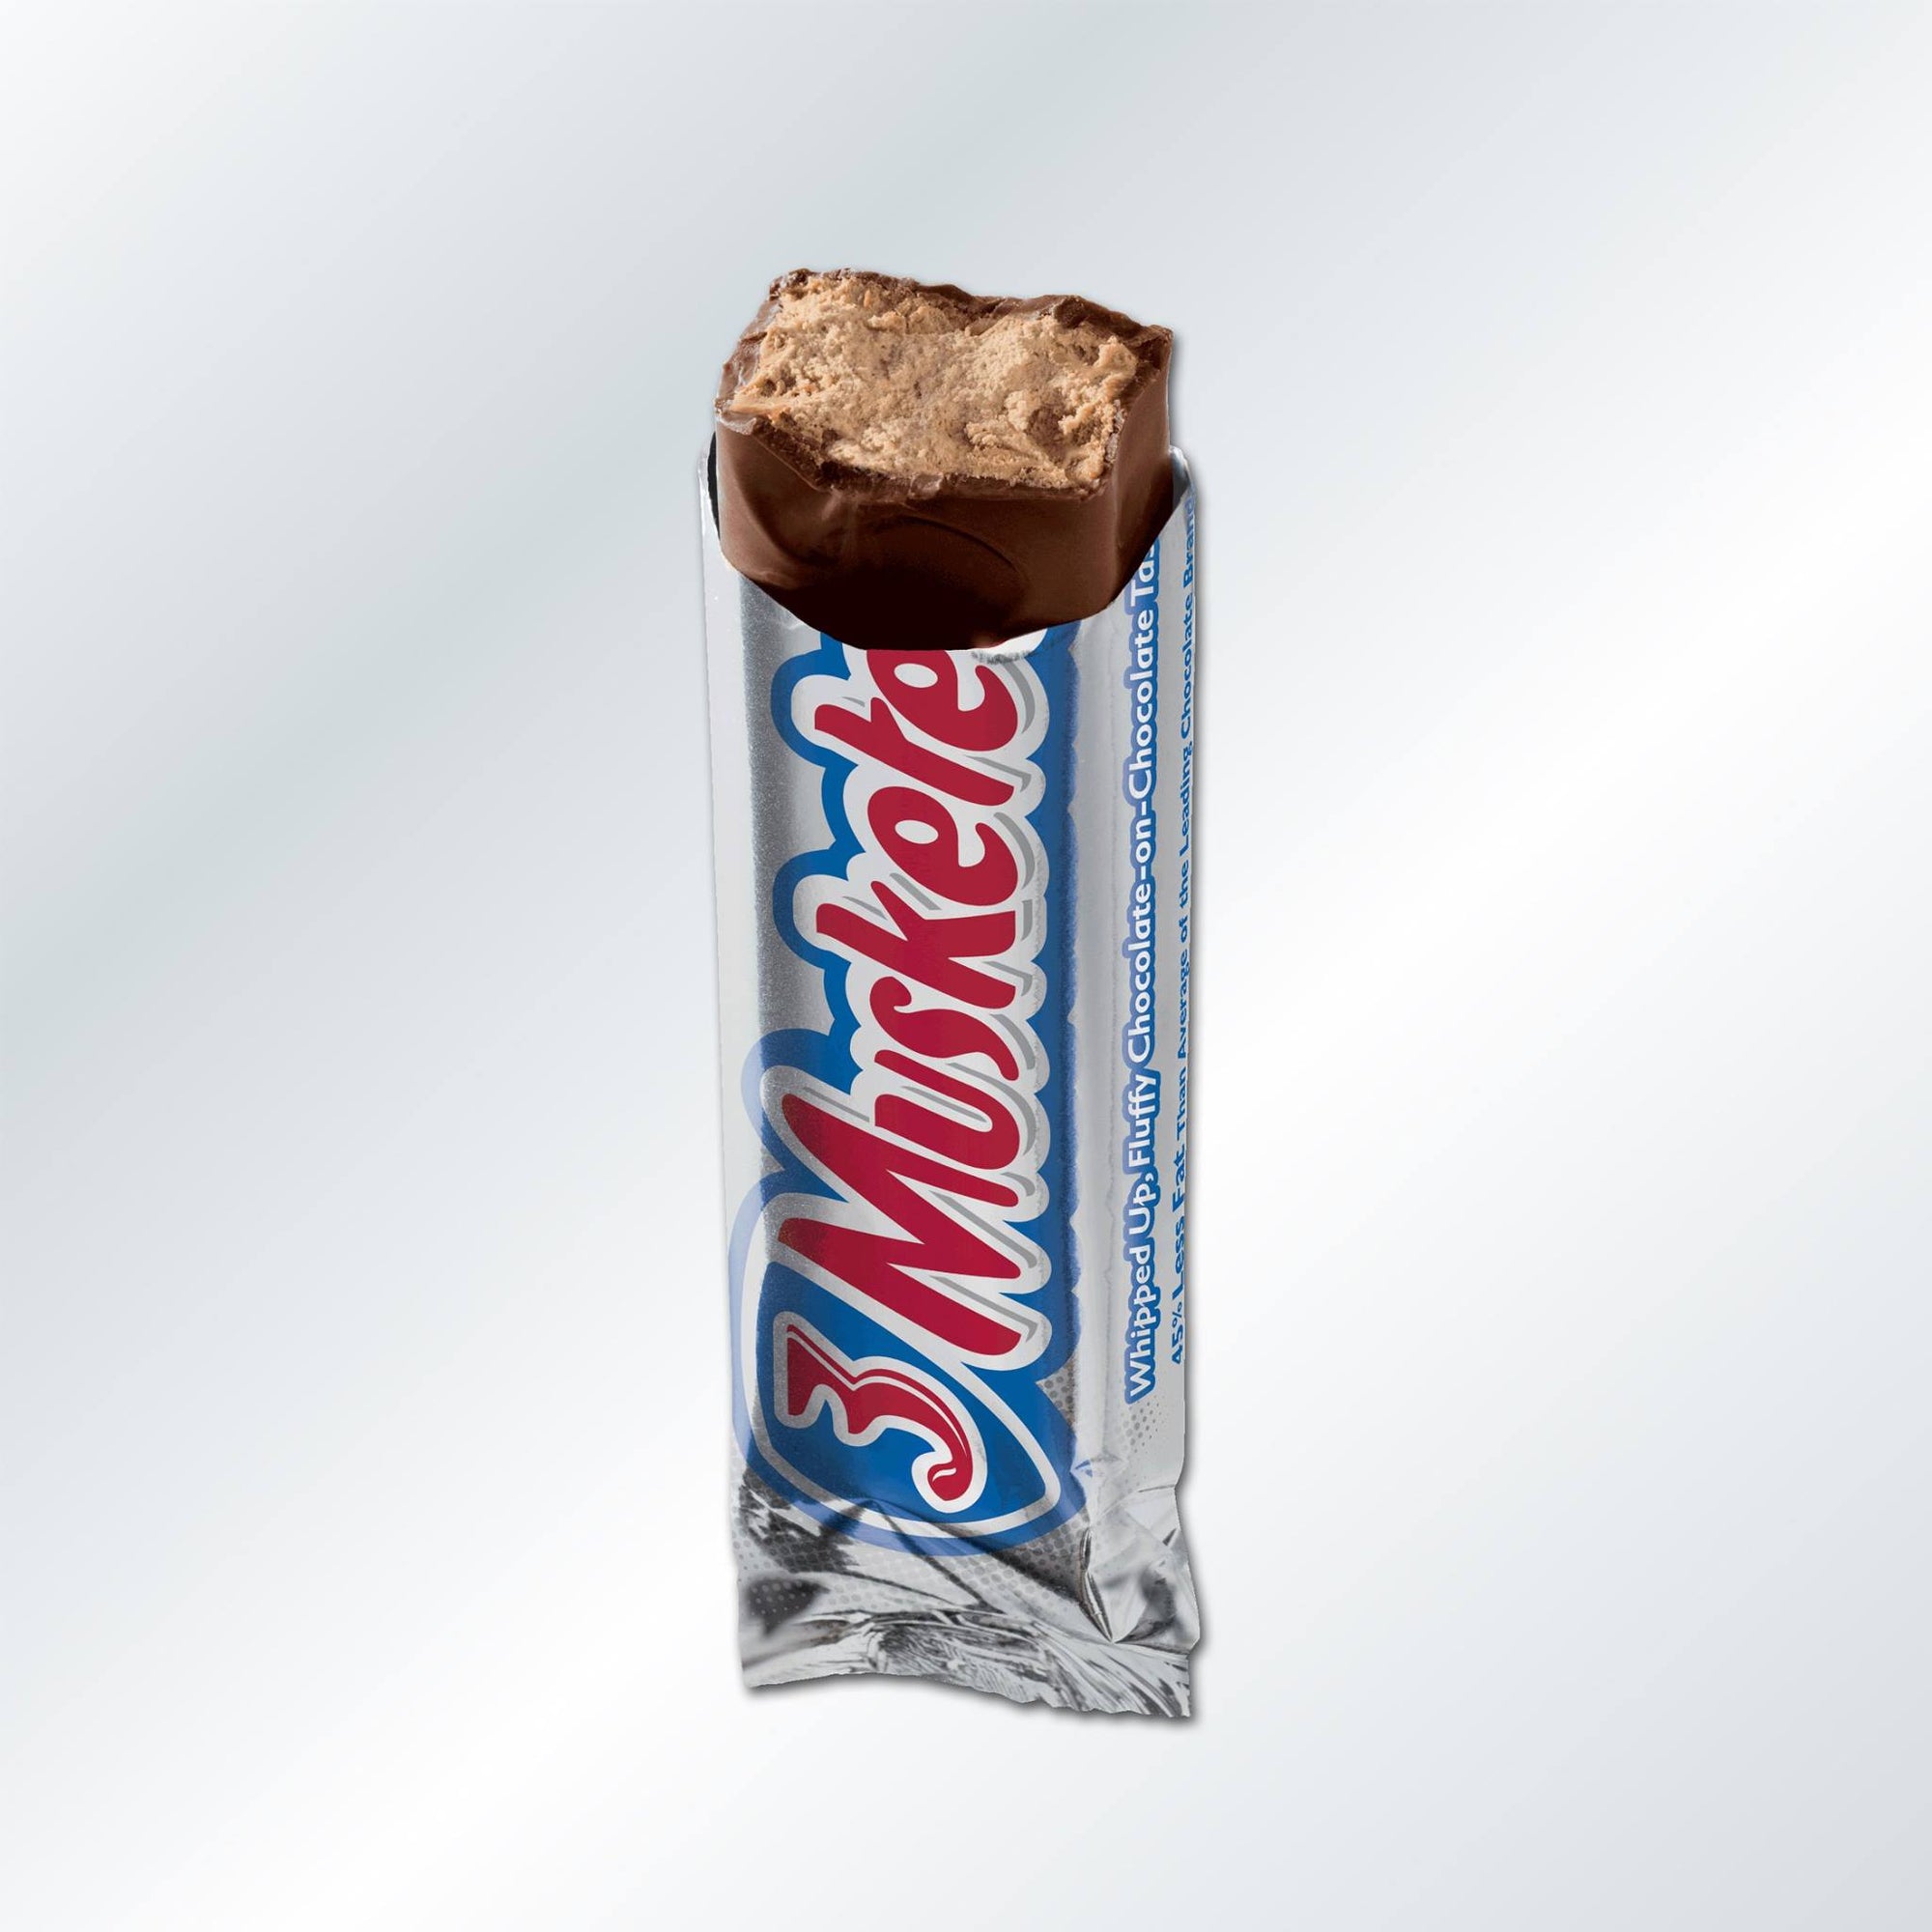 3 Musketeers Candy Bar